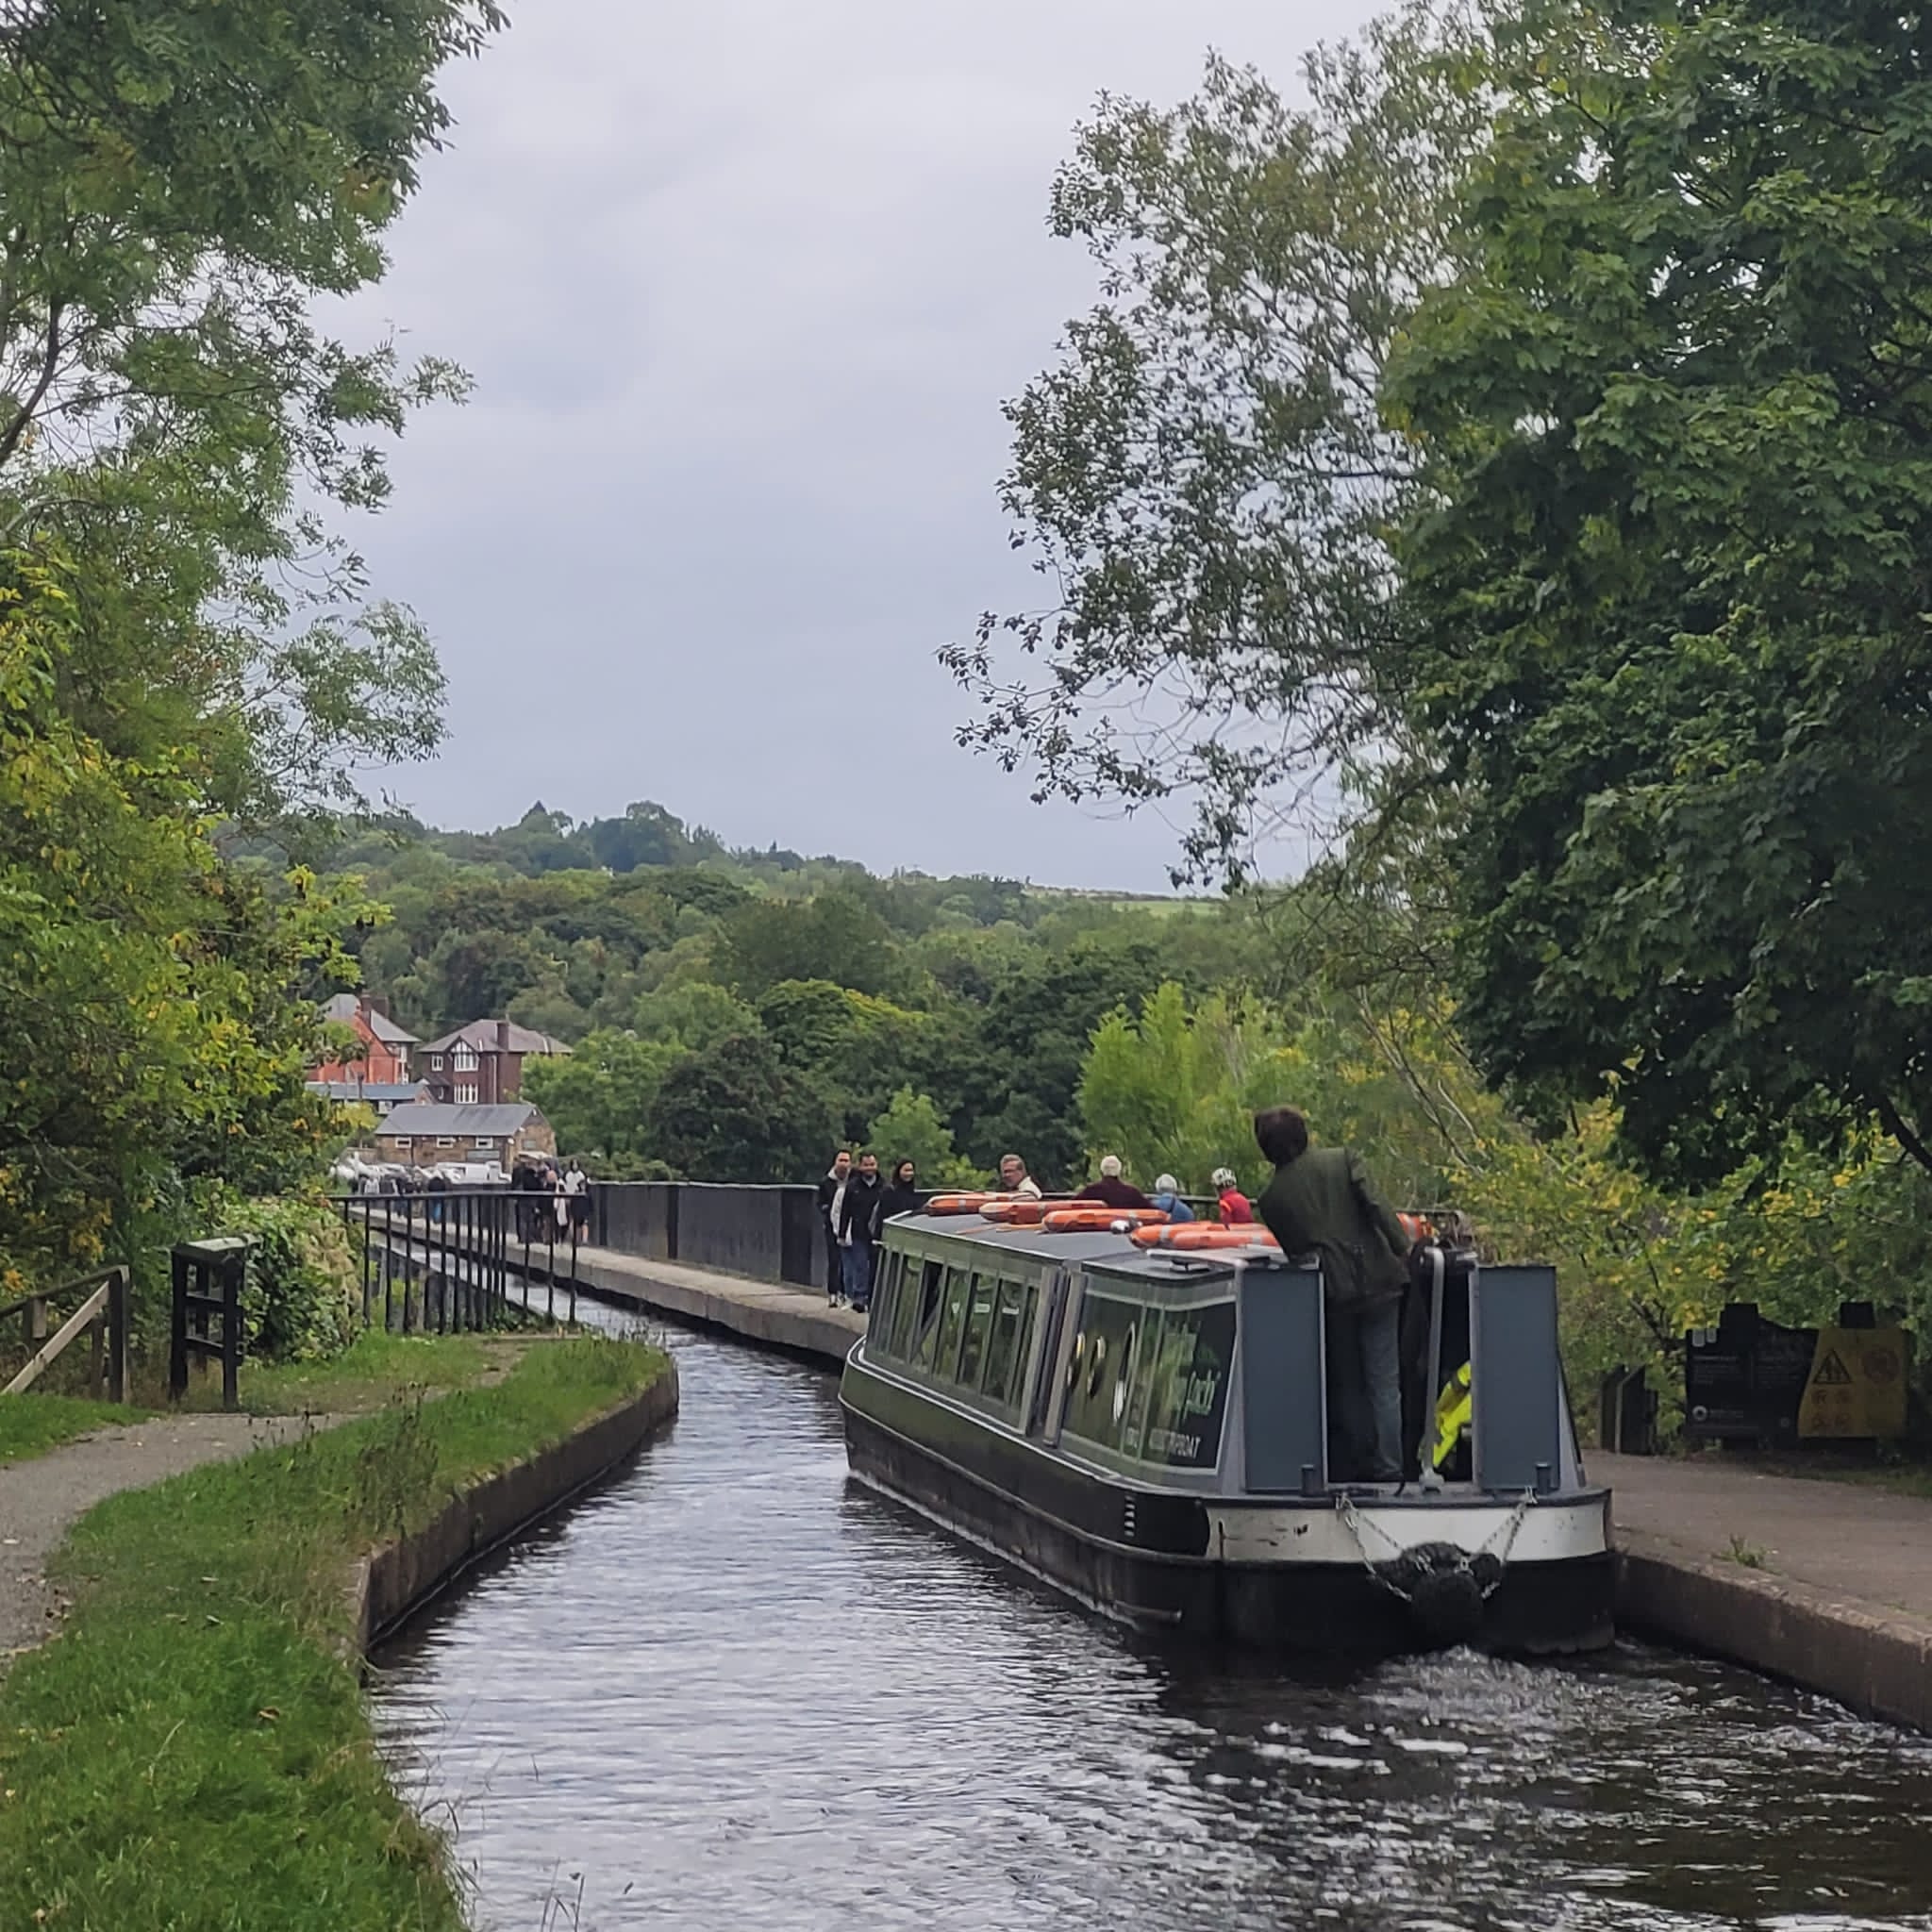 Boat trips across the Poncysyllte Aqueduct